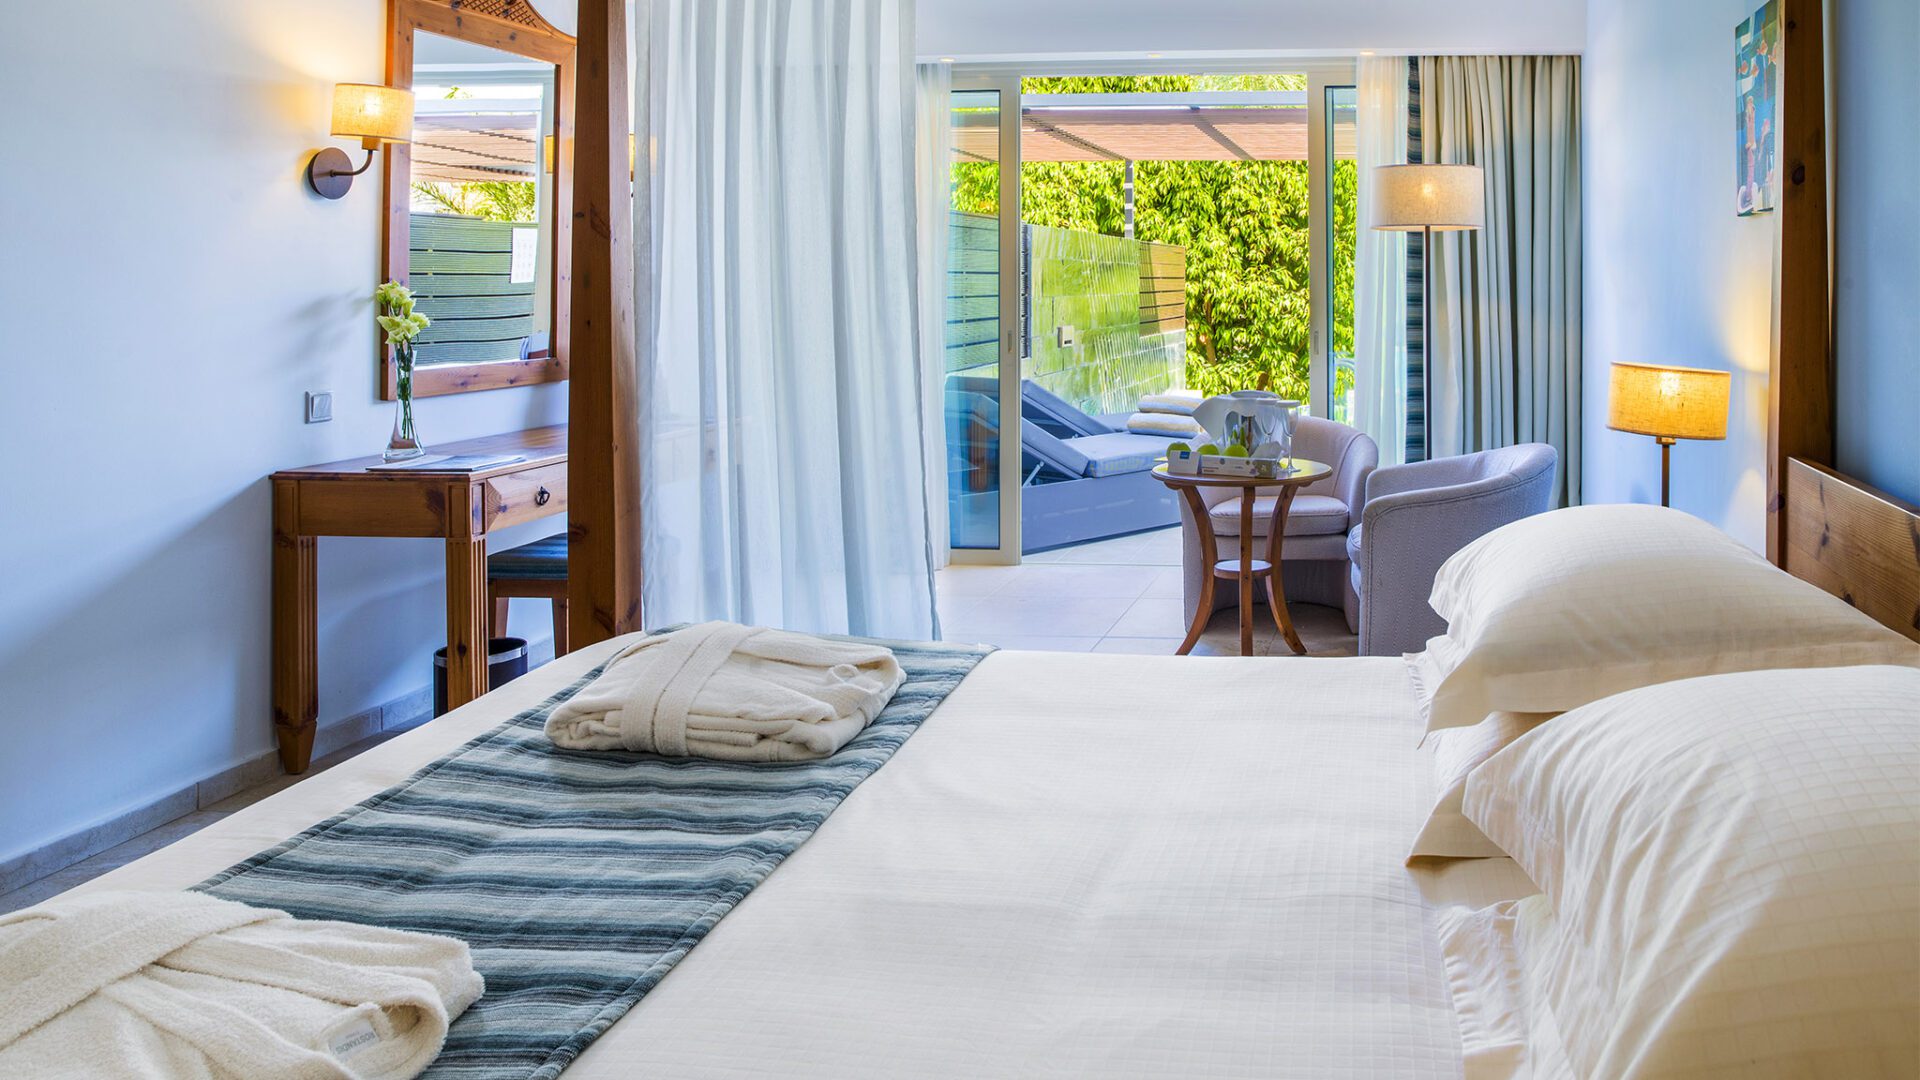 Fisherman's Junior Suite with private pool